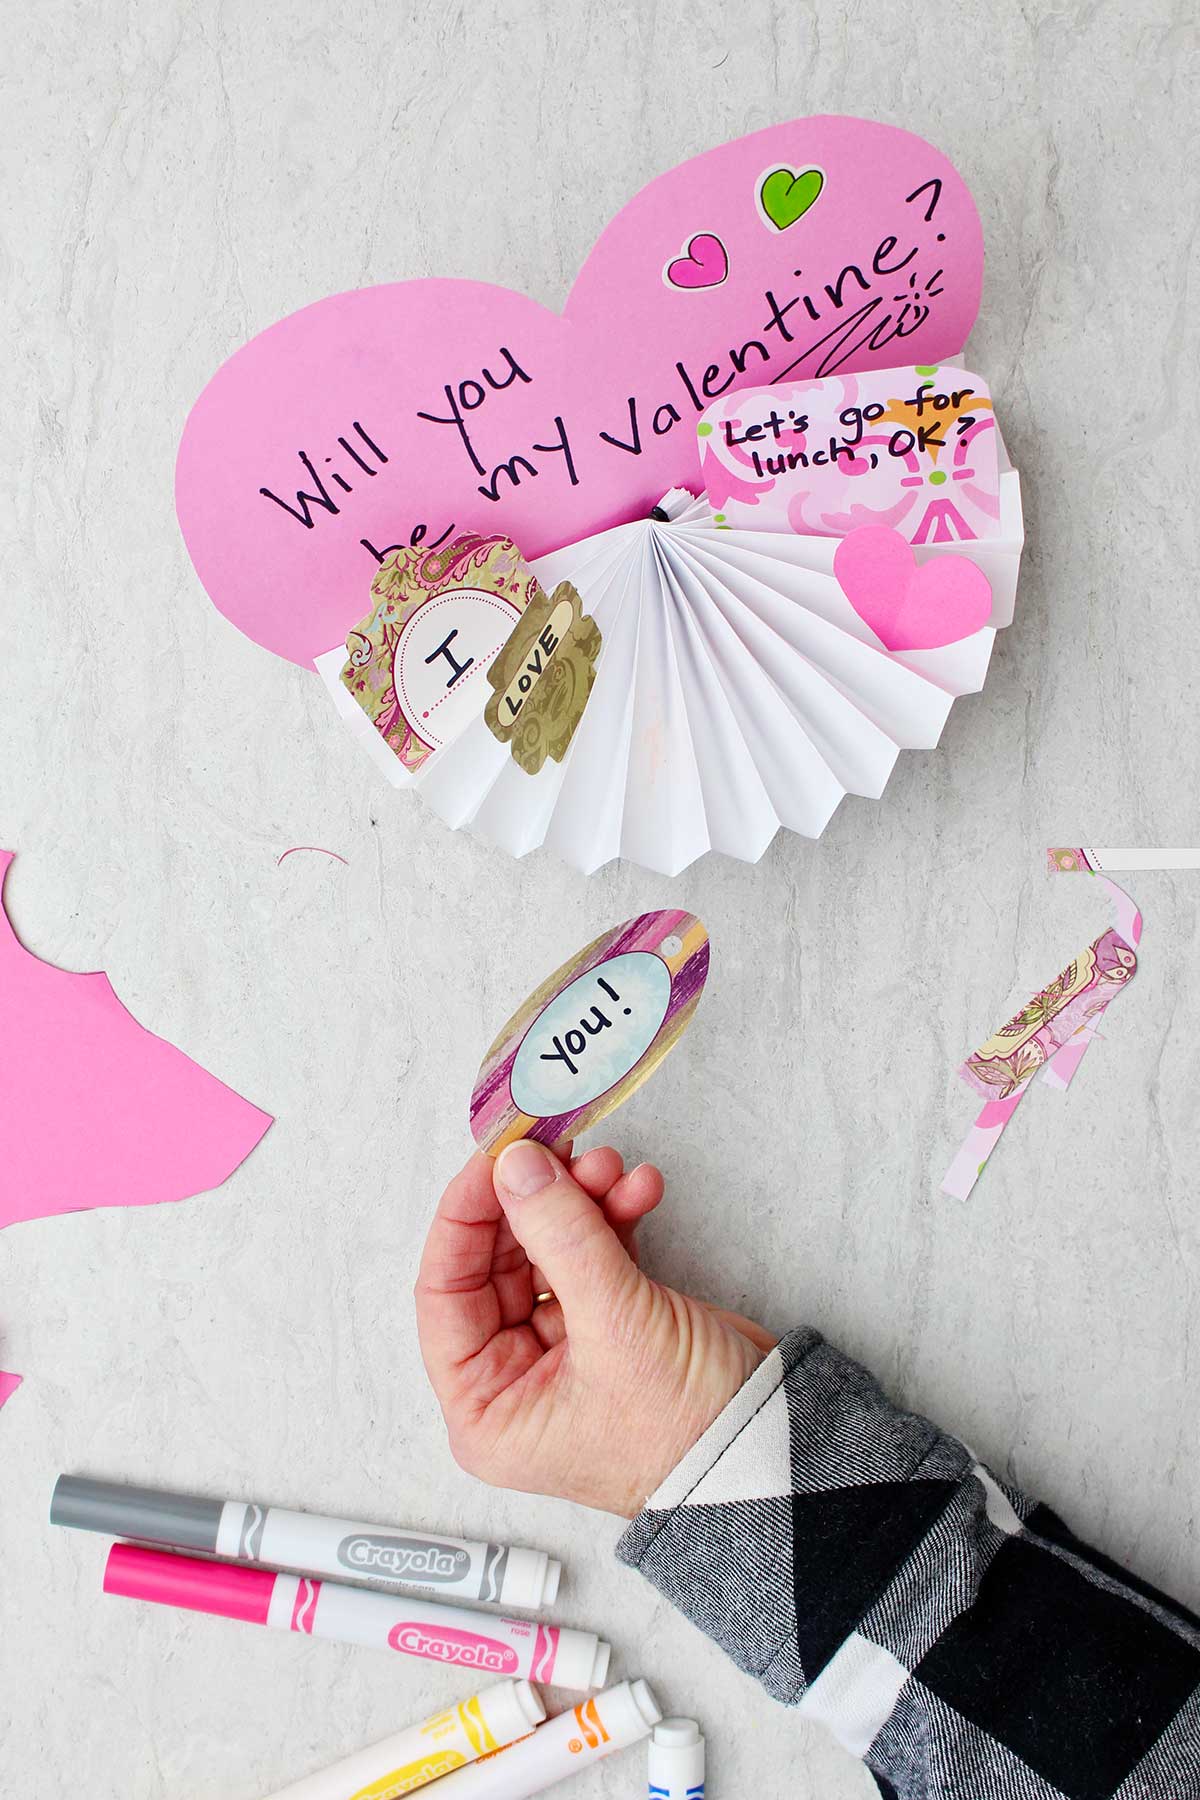 Little love notes being glued into folds of Valentine's Day themed fan.